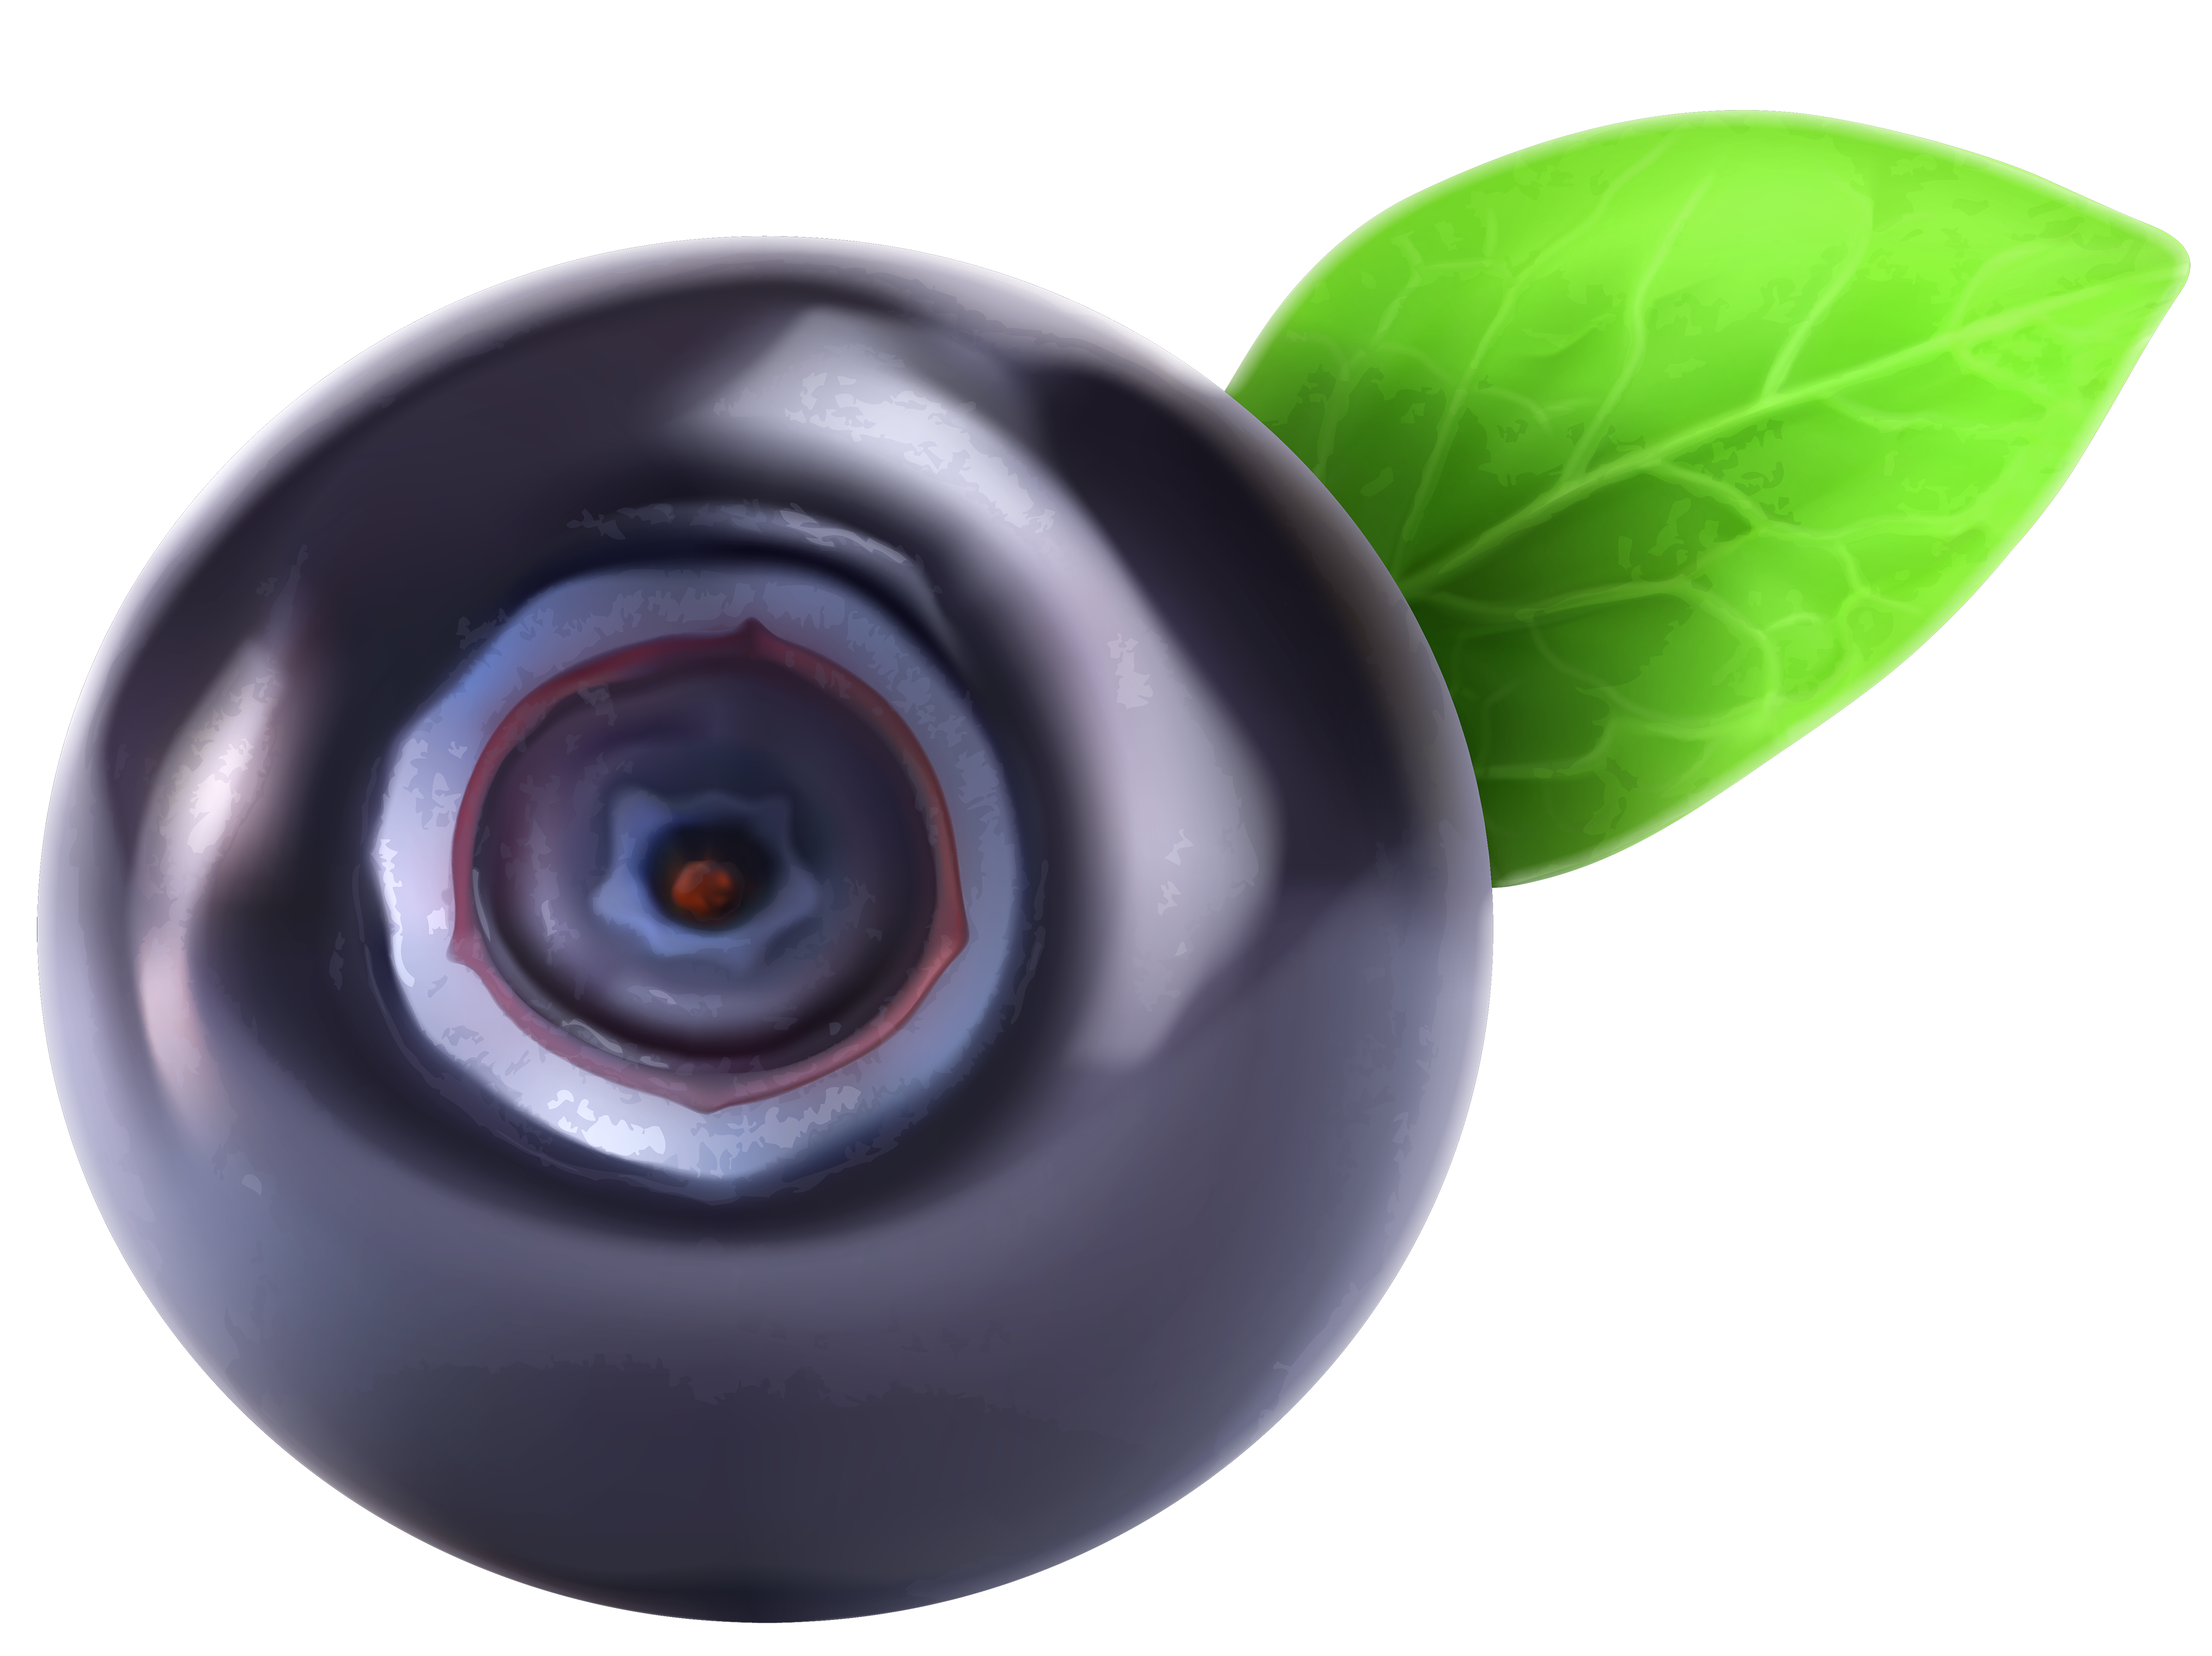 Png best web. Blueberry clipart single